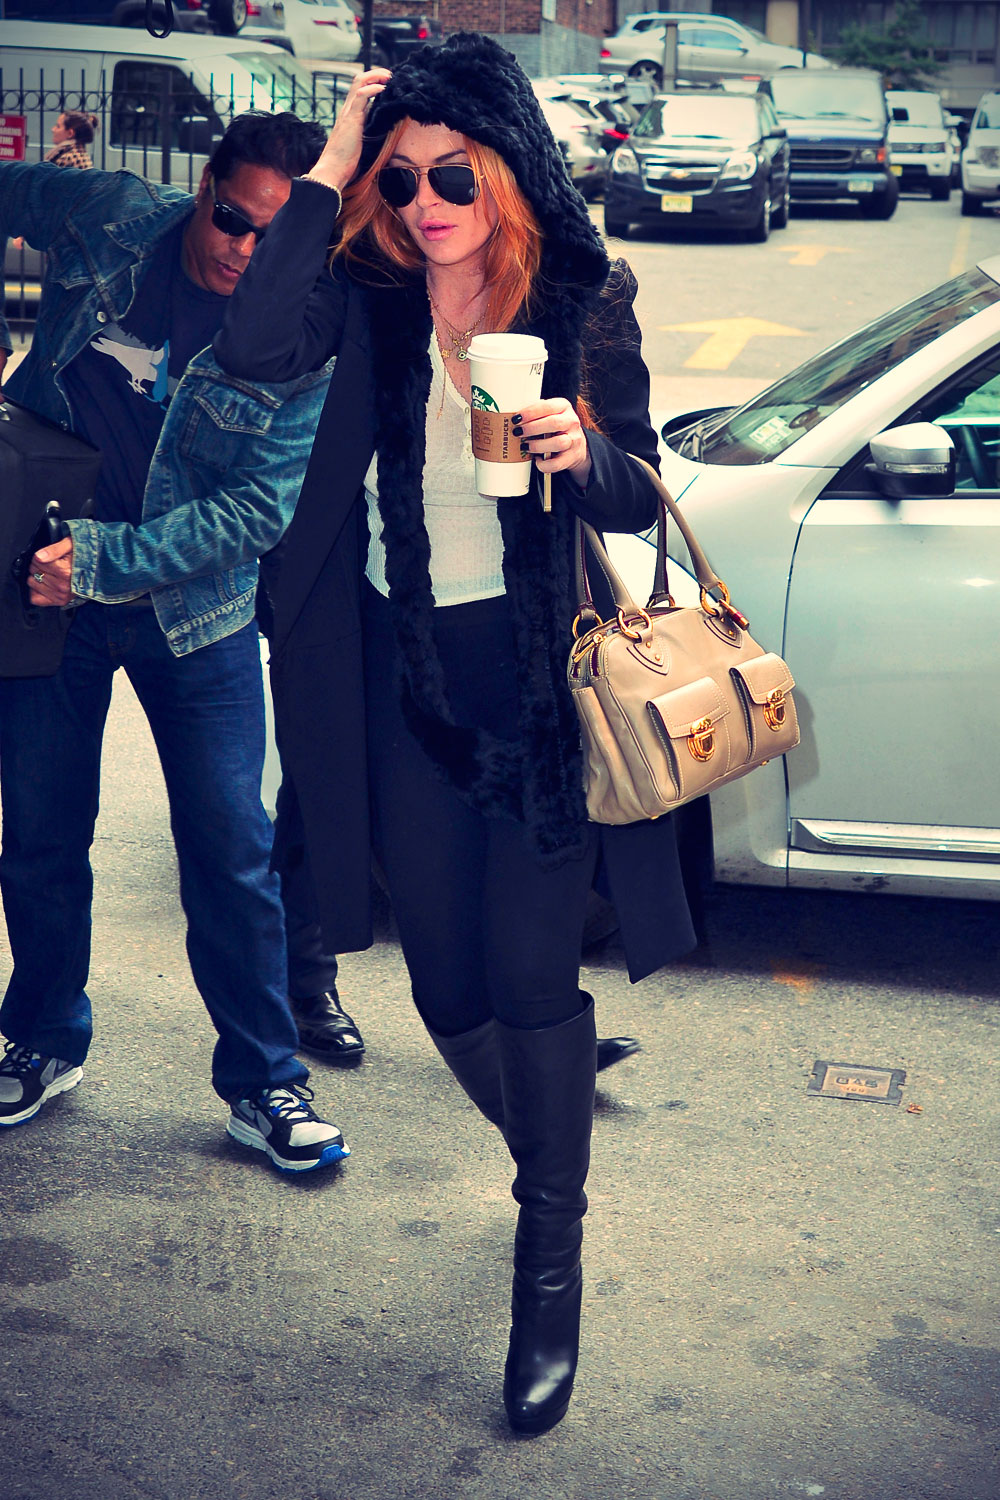 Lindsay Lohan pictured in the FlatIron District